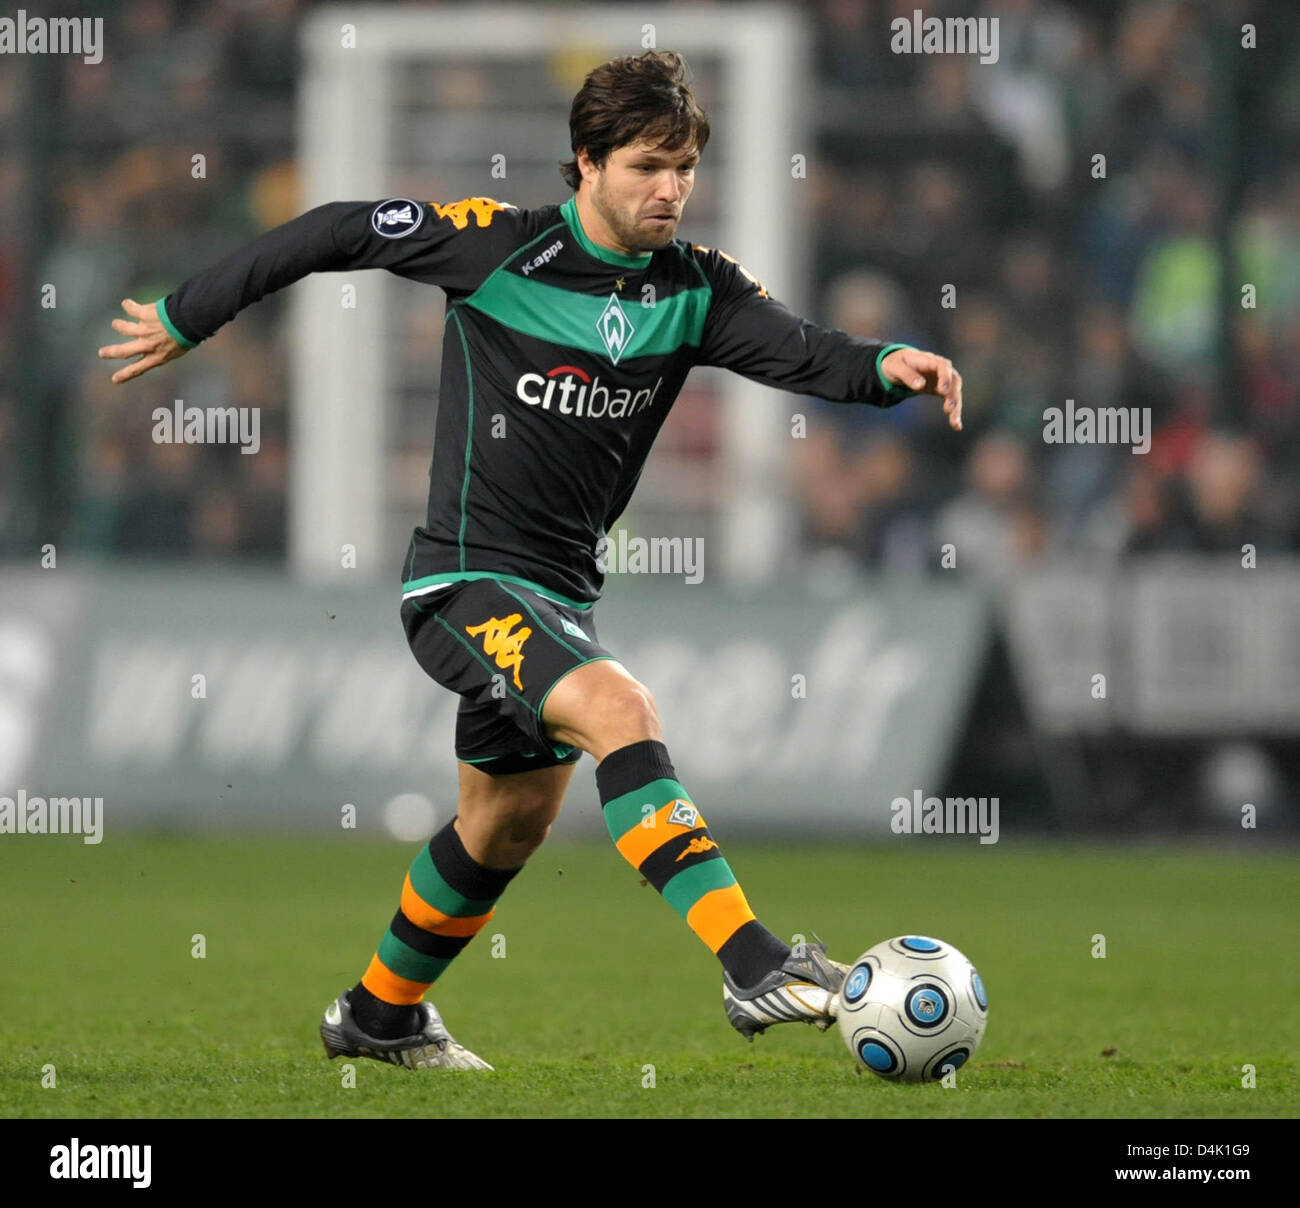 Werder Bremen player Diego is shown in action during the UEFA Cup last sixteen return match against AS Saint-Etienne at Stadium Geoffroy Guichard in Saint Etienne, France, 18 March 2009. The game ended in a 2-2 tie with Bremen qualifying for the quarter-finals. Photo: Carmen Jaspersen Stock Photo